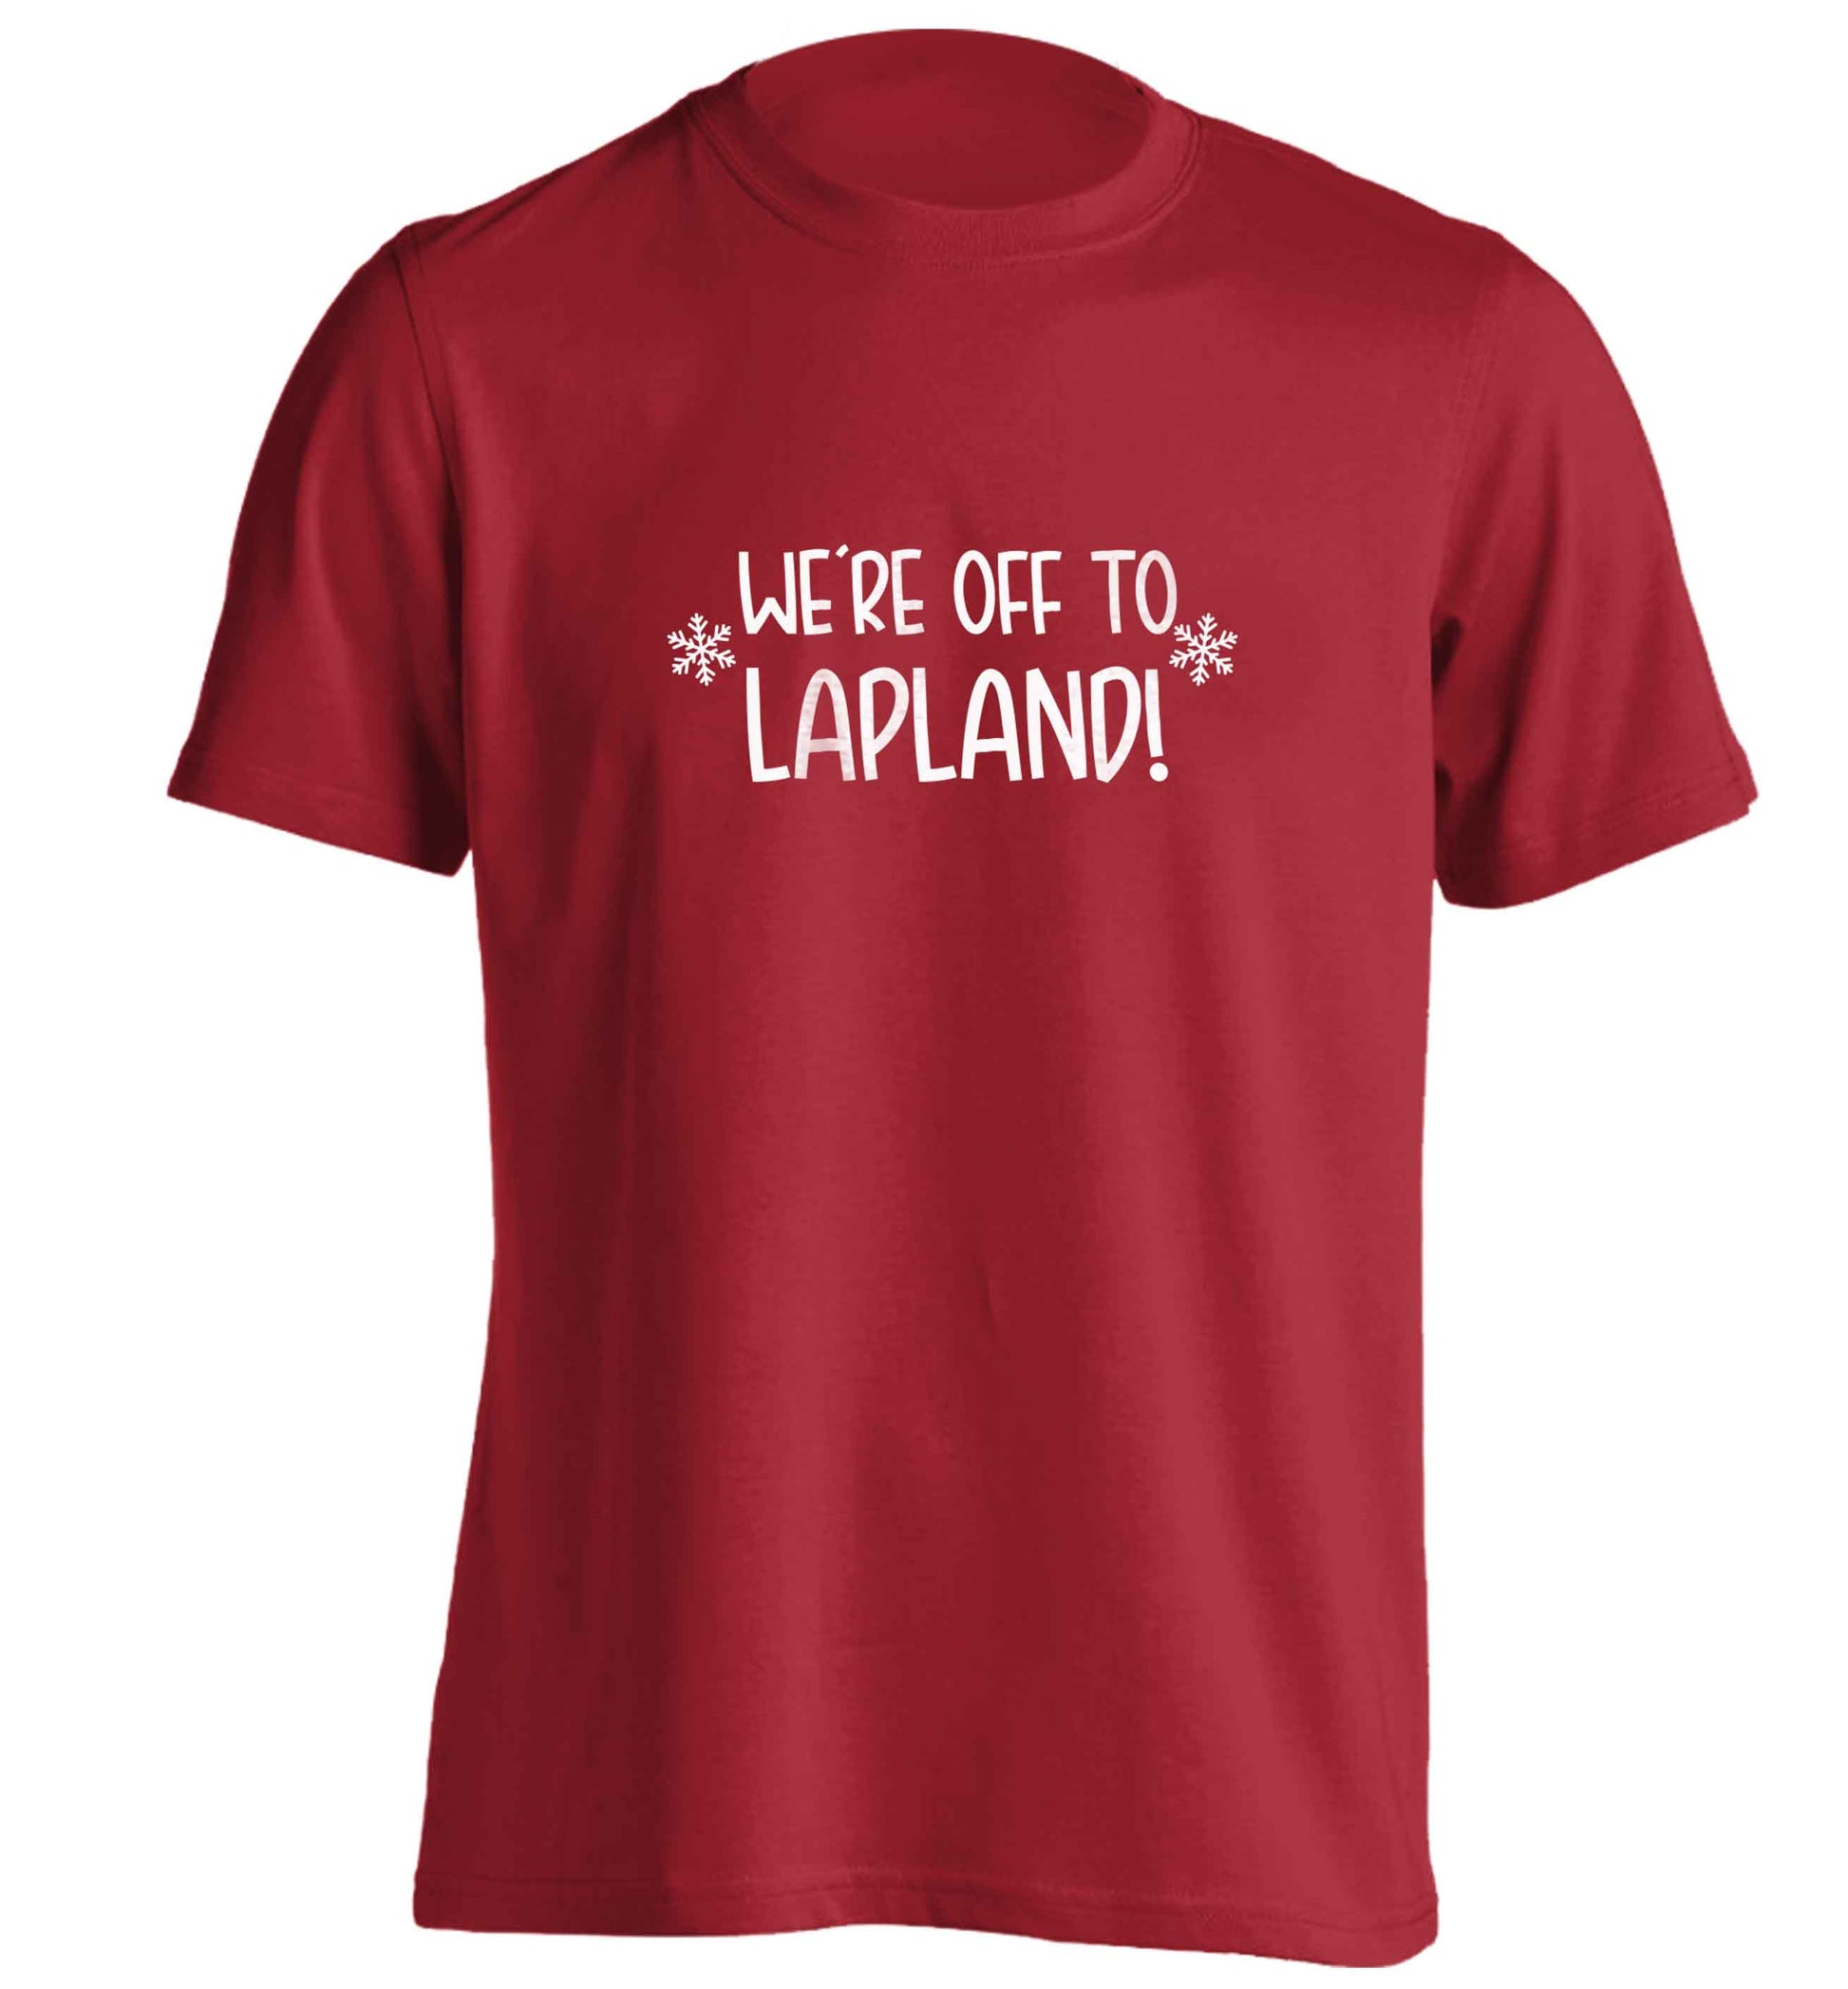 We're off to Lapland adults unisex red Tshirt 2XL